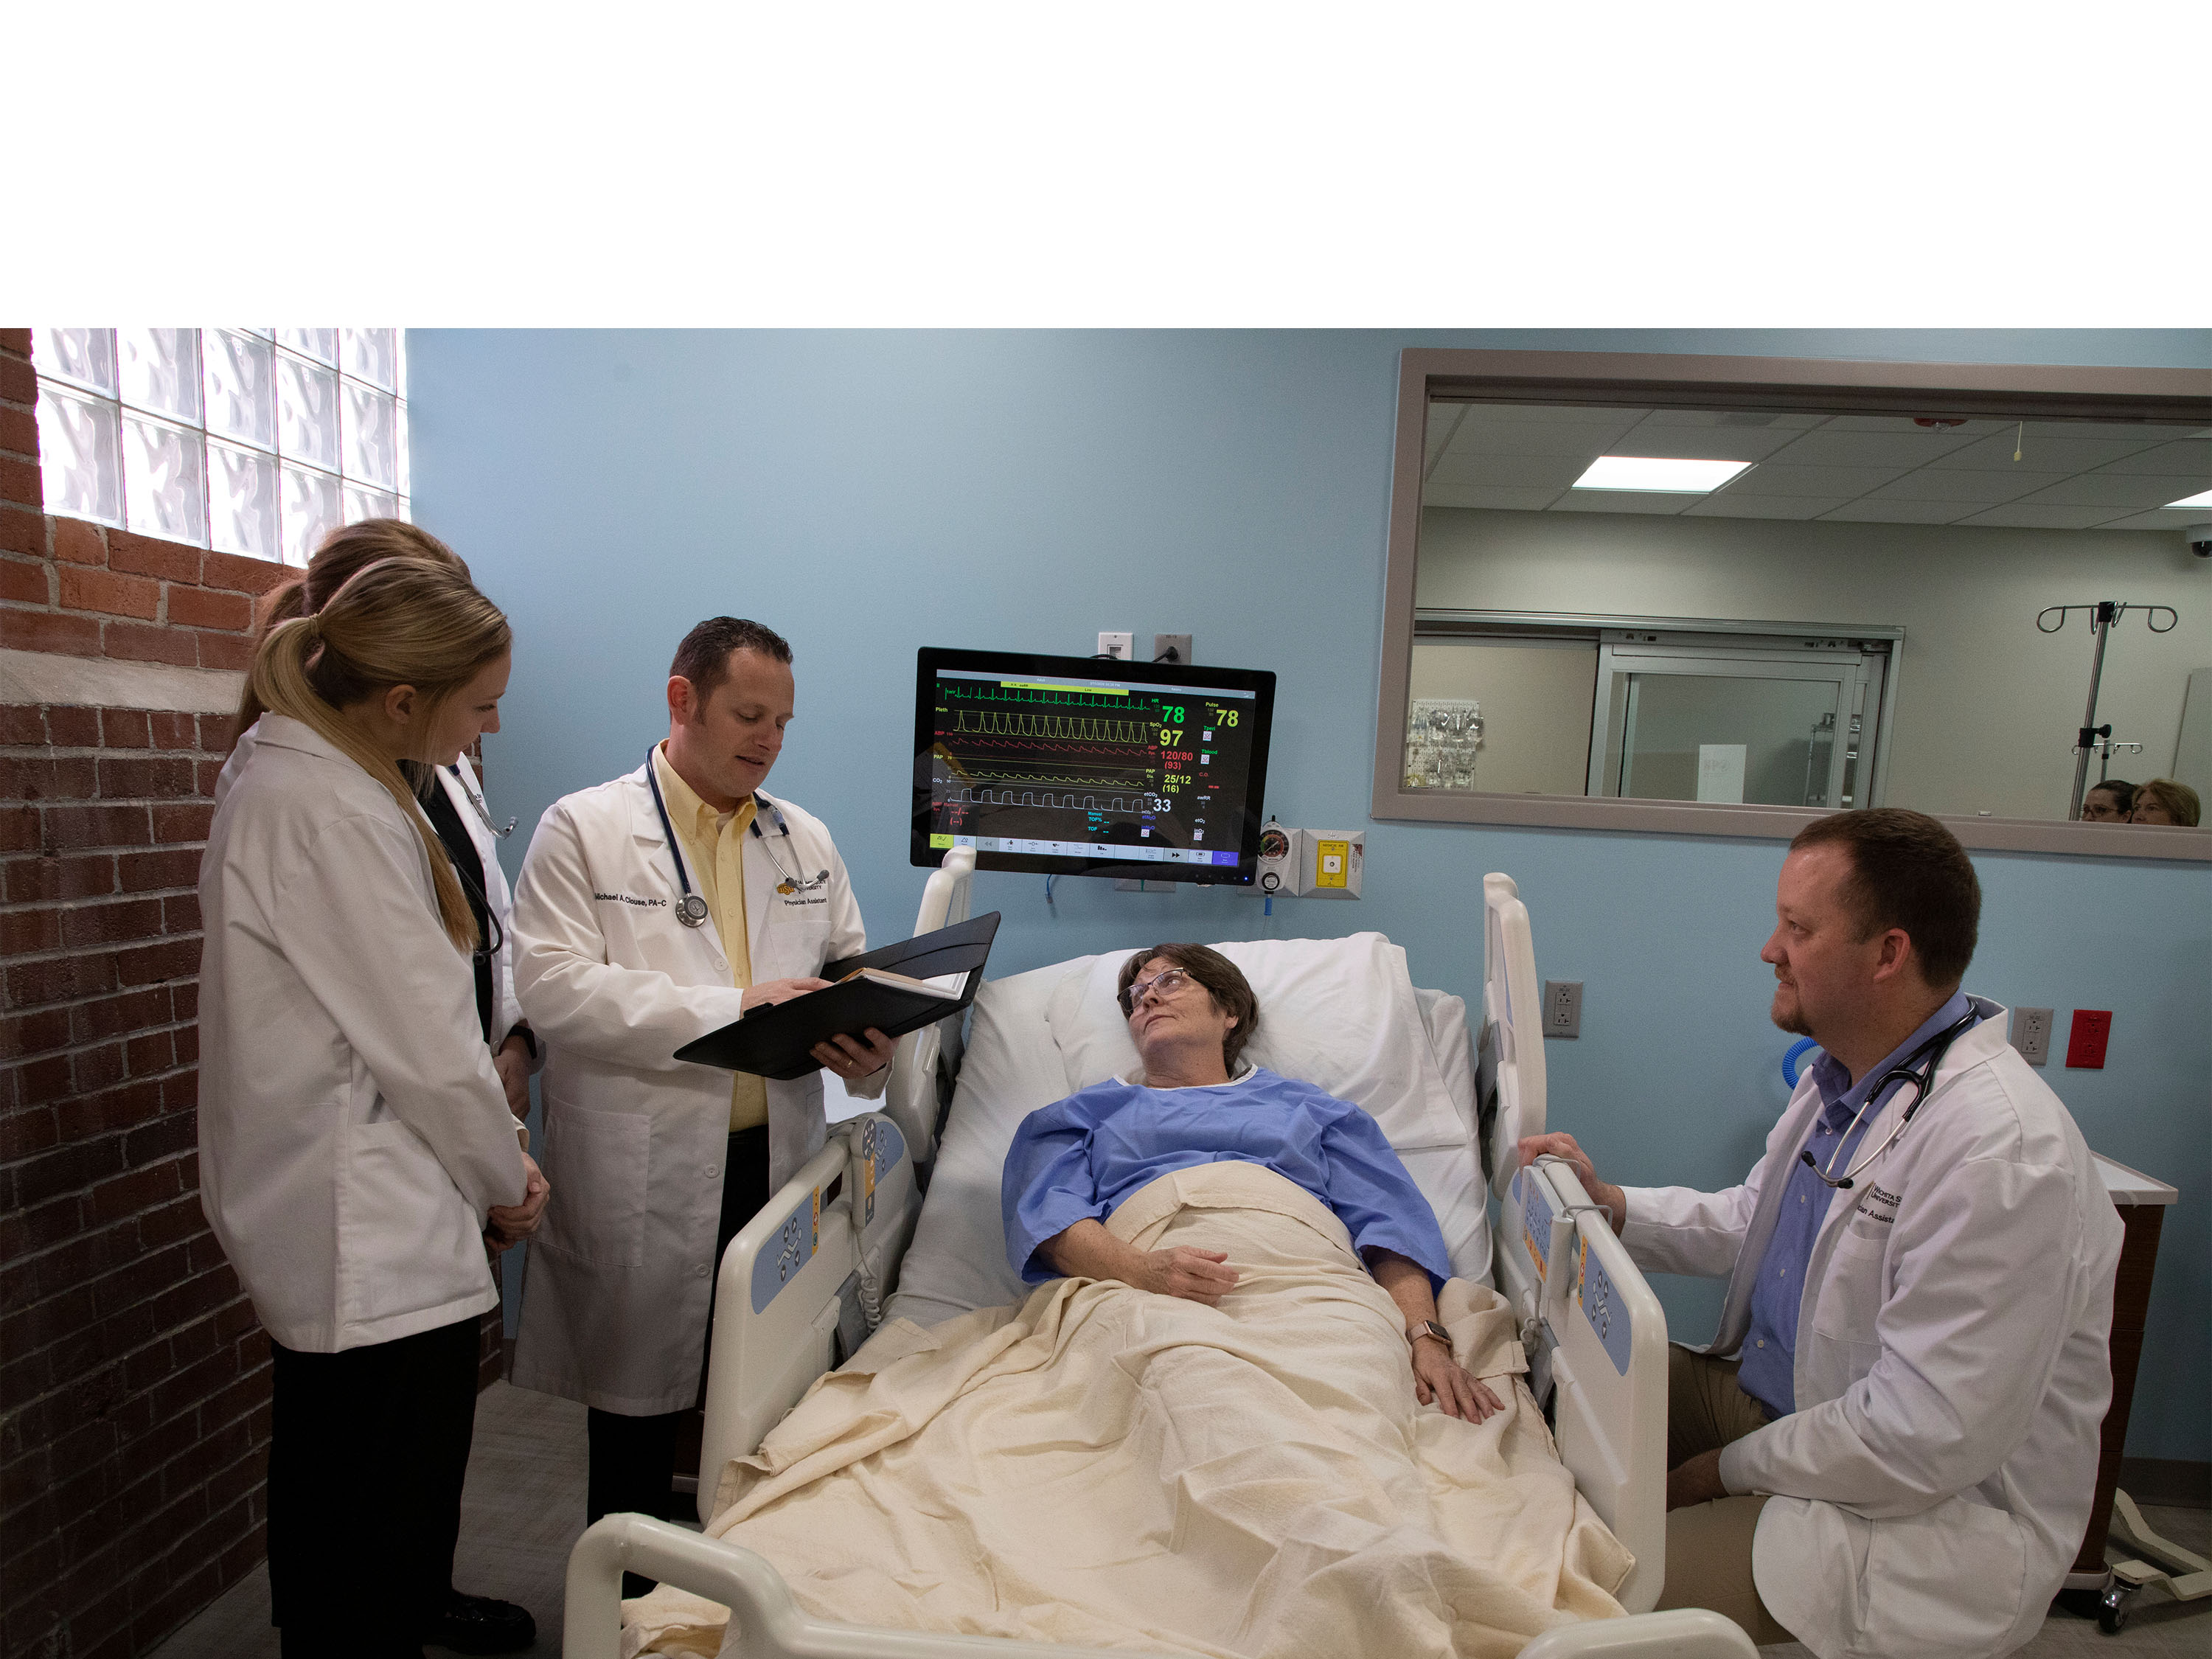 PA faculty and students with patient